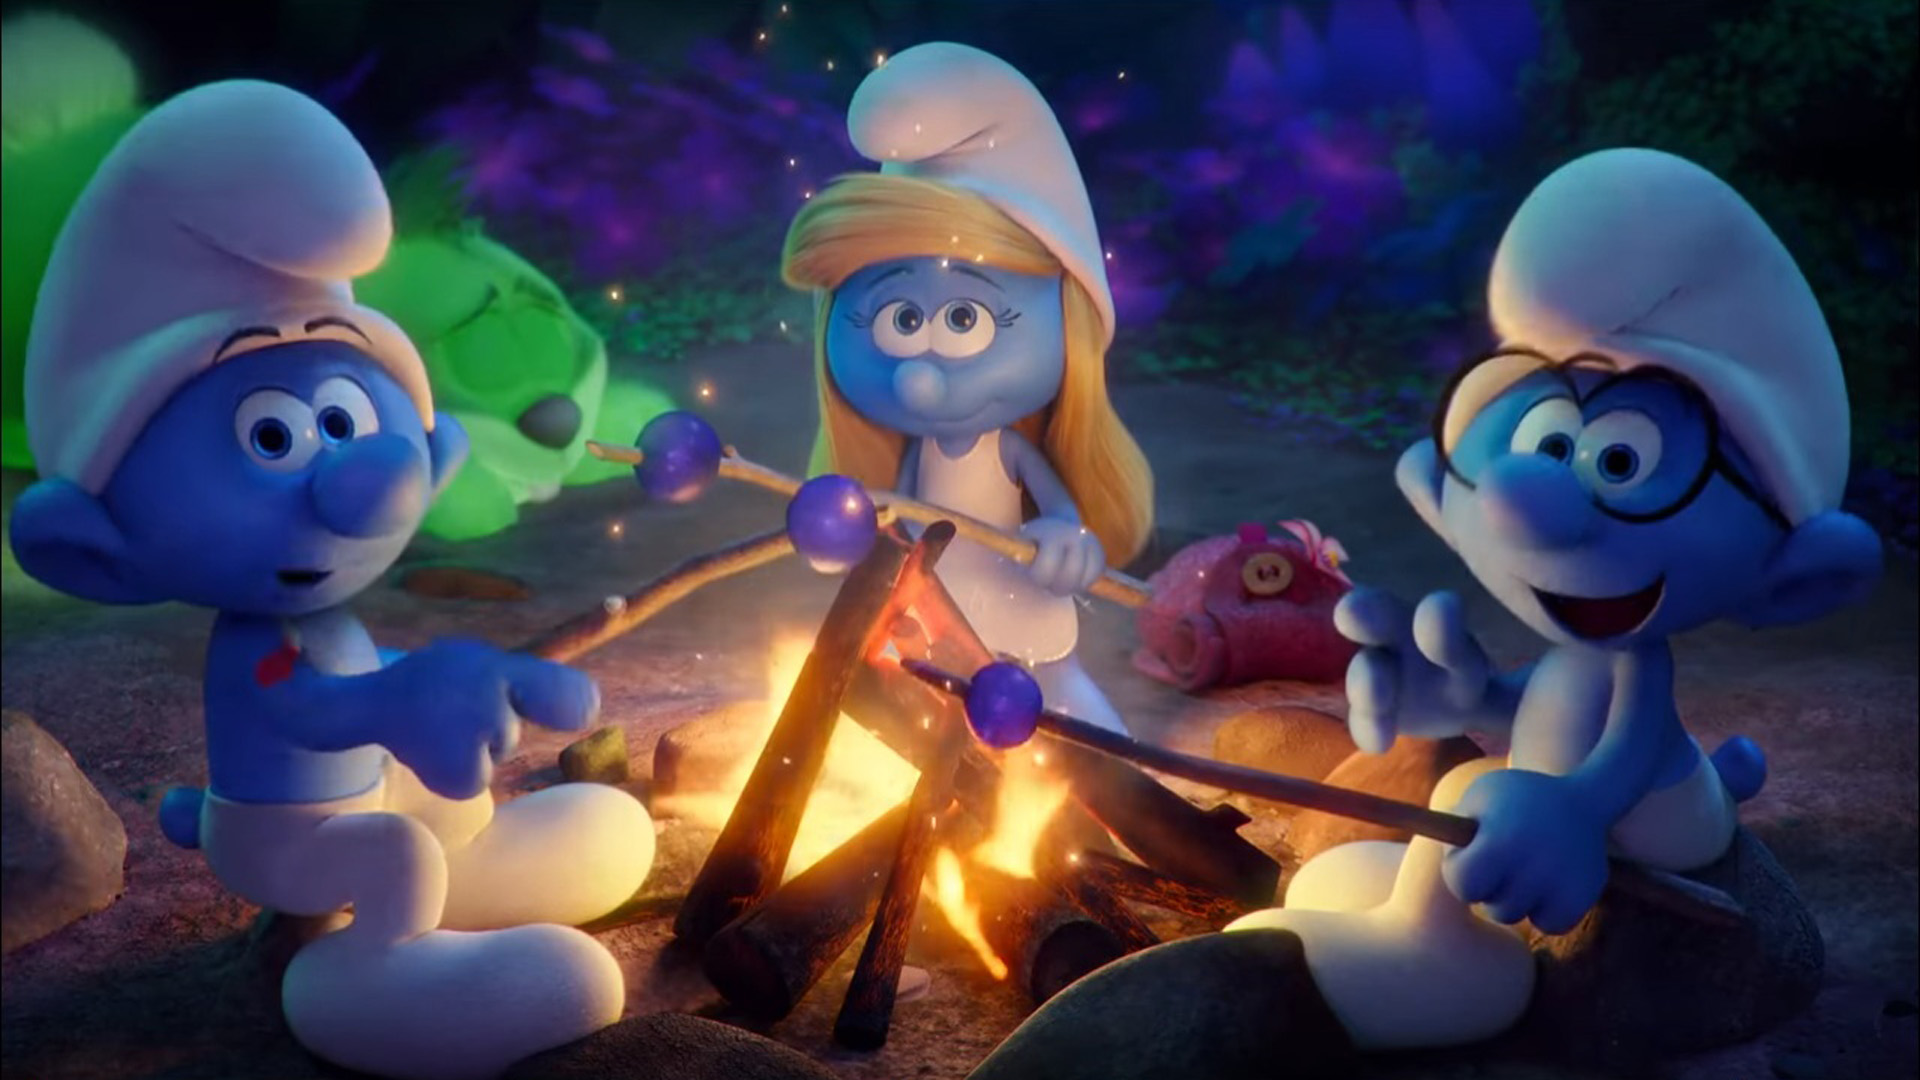 Smurfette Brainy Hefty And Hefty Smurfs In The Movie The Lost Village Scree...